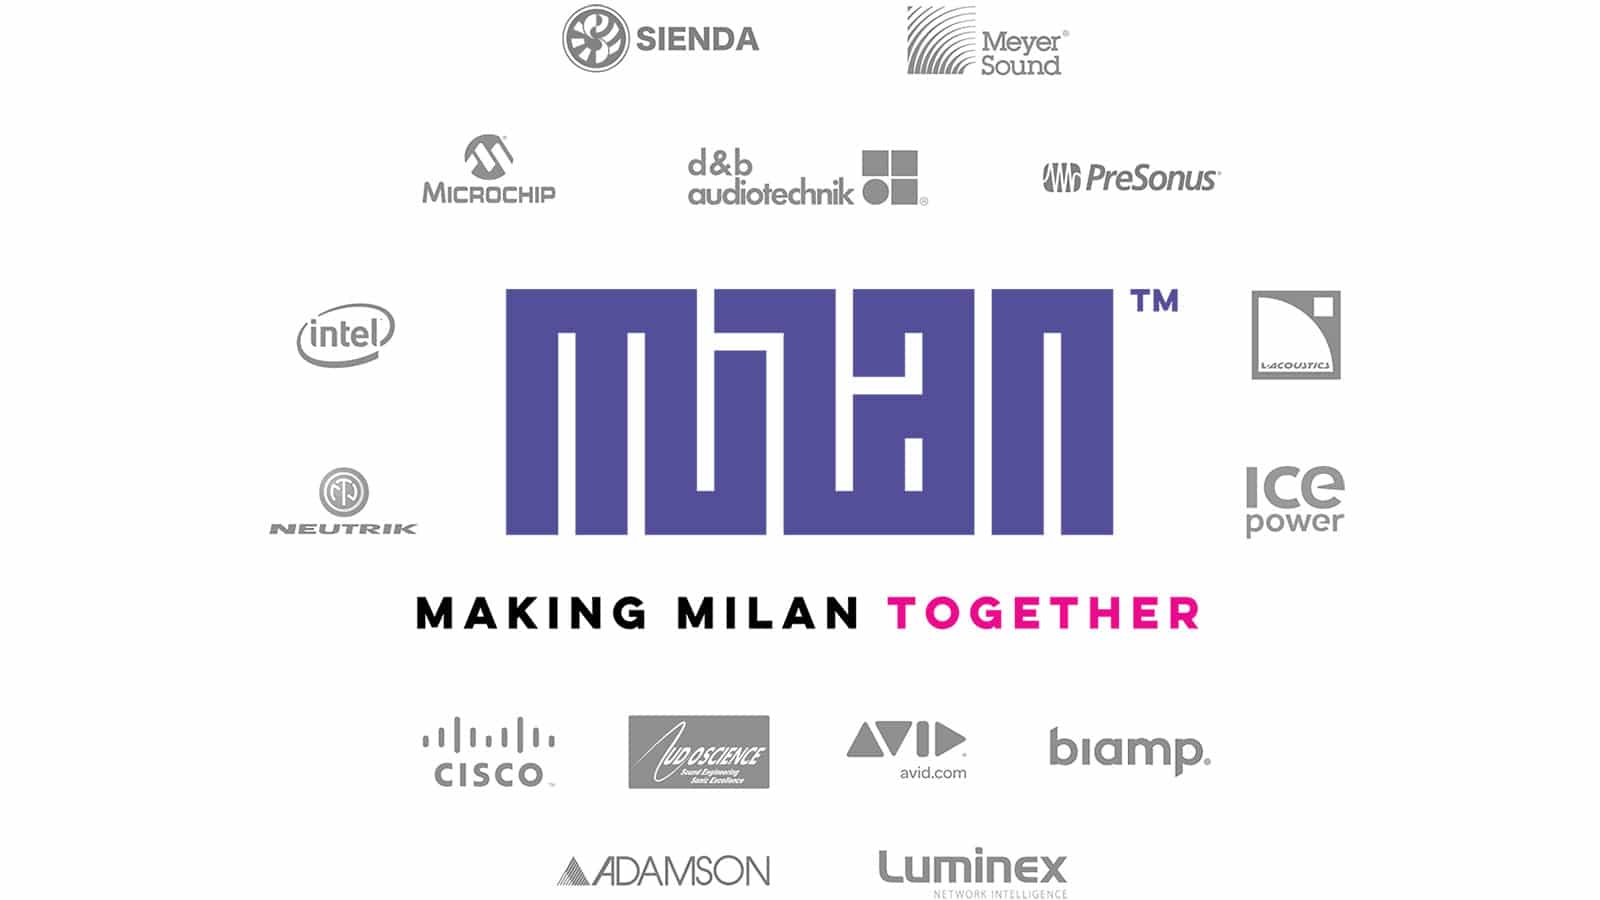 Meyer Sound Galileo GALAXY Leads the Way with Milan Certification from Avnu Alliance